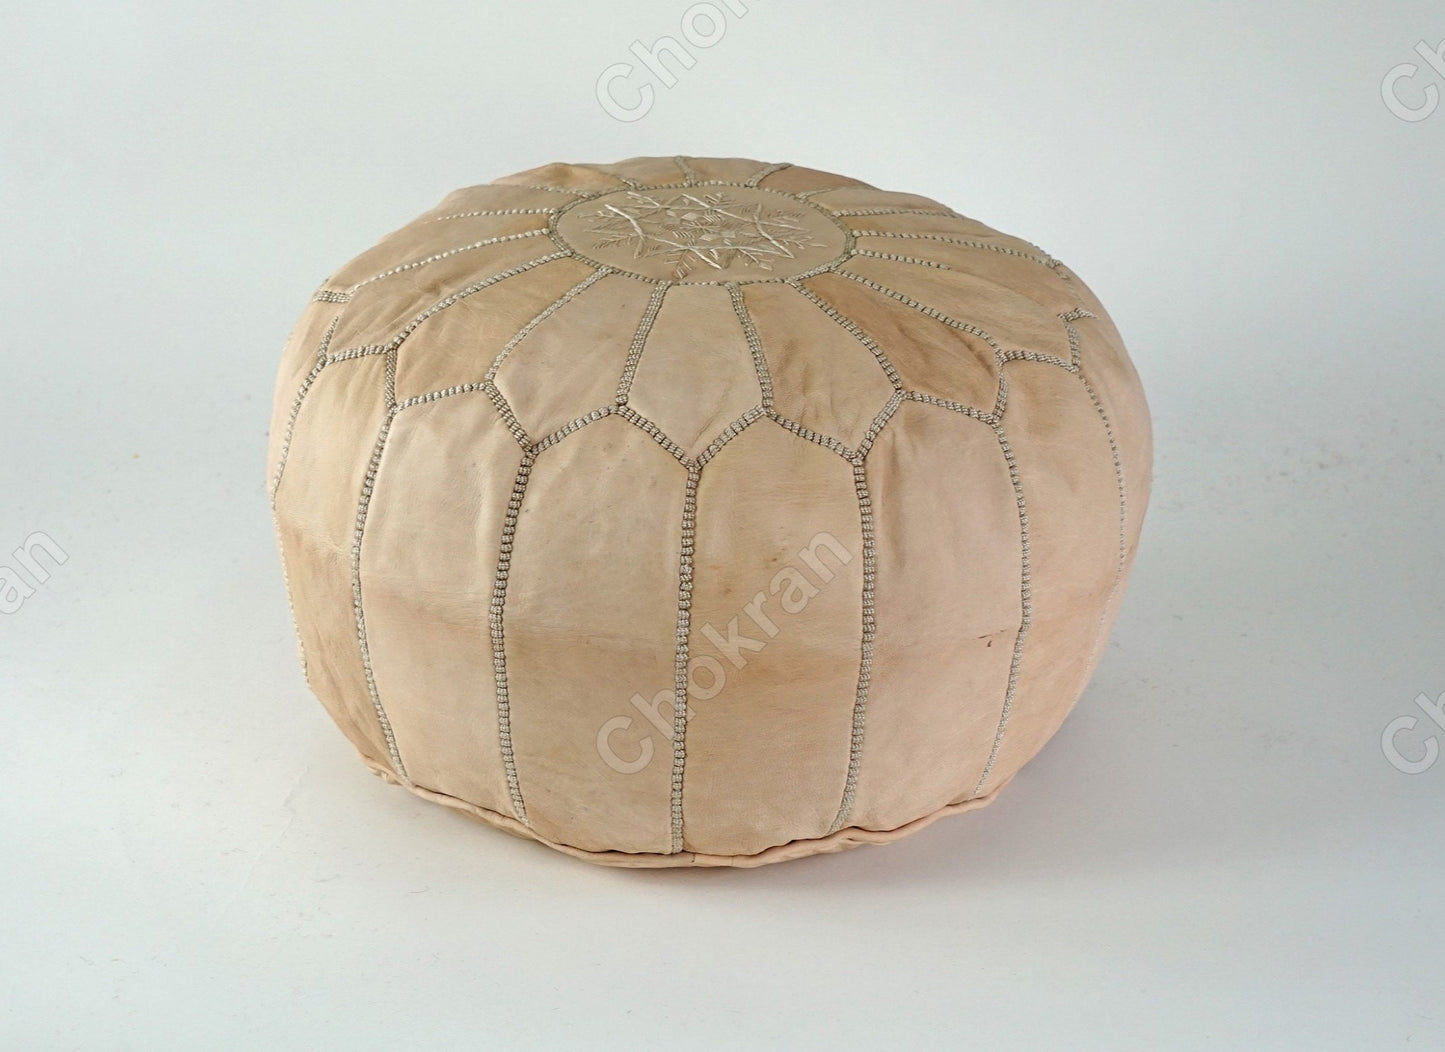 Moroccan leather pouf, round leather ottoman, handmade leather pouf, Moroccan genuine leather footstool- Natural Tan color -UNSTUFFED